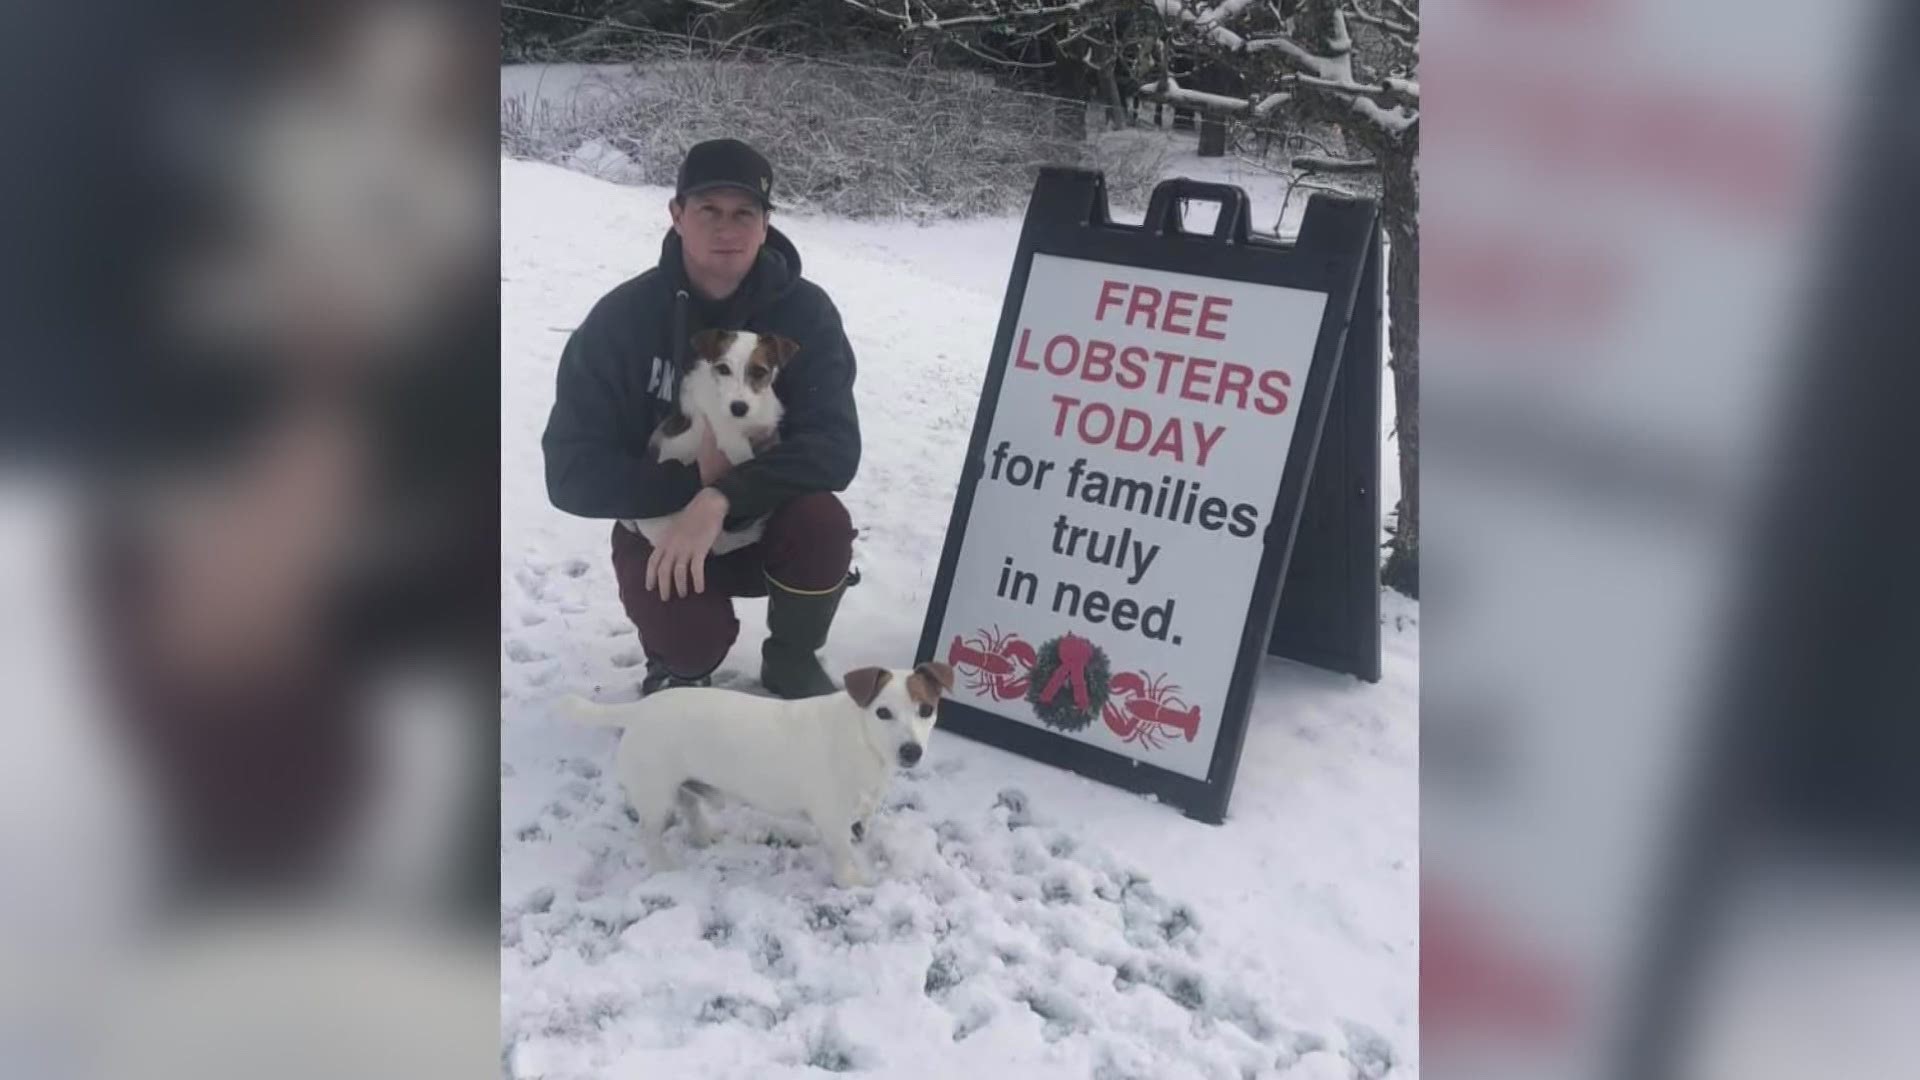 Noah Ames will be giving away free lobsters to families in need on December 24th. Ames says he started the tradition six years ago, and it has continued to grow.